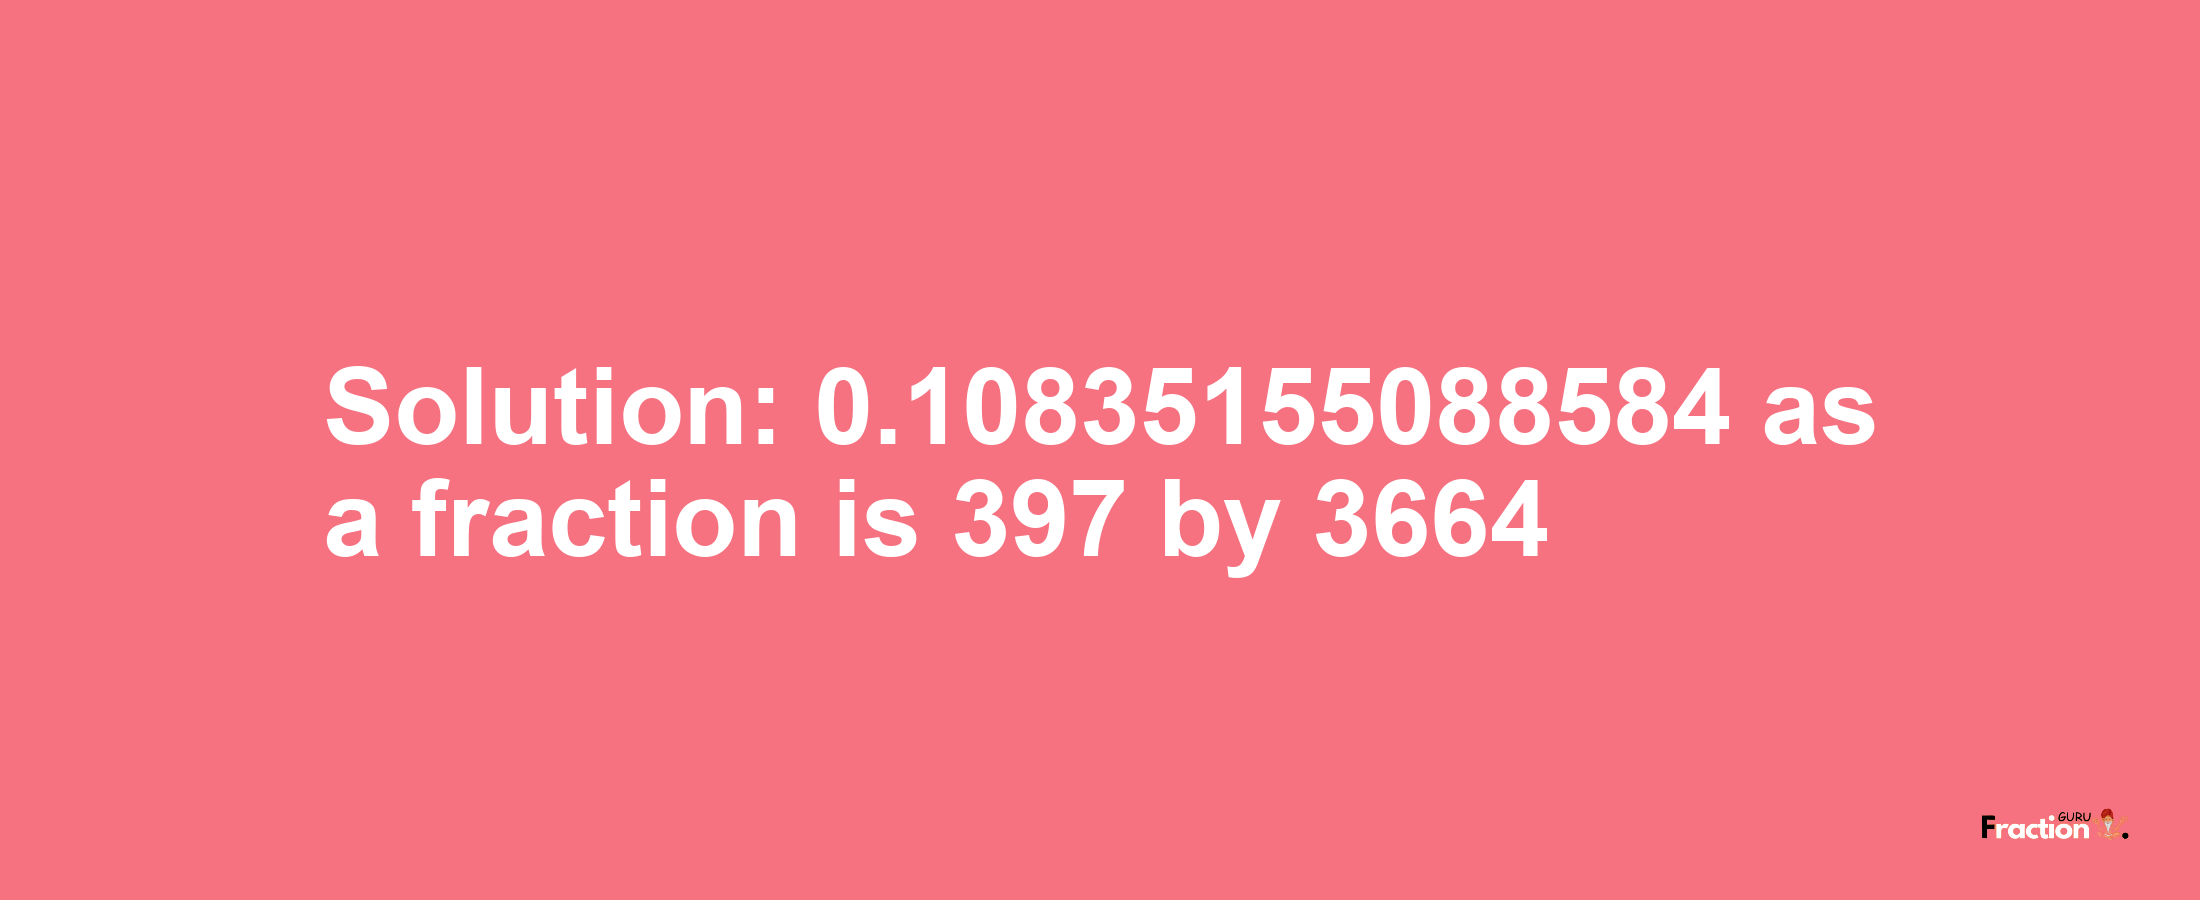 Solution:0.10835155088584 as a fraction is 397/3664